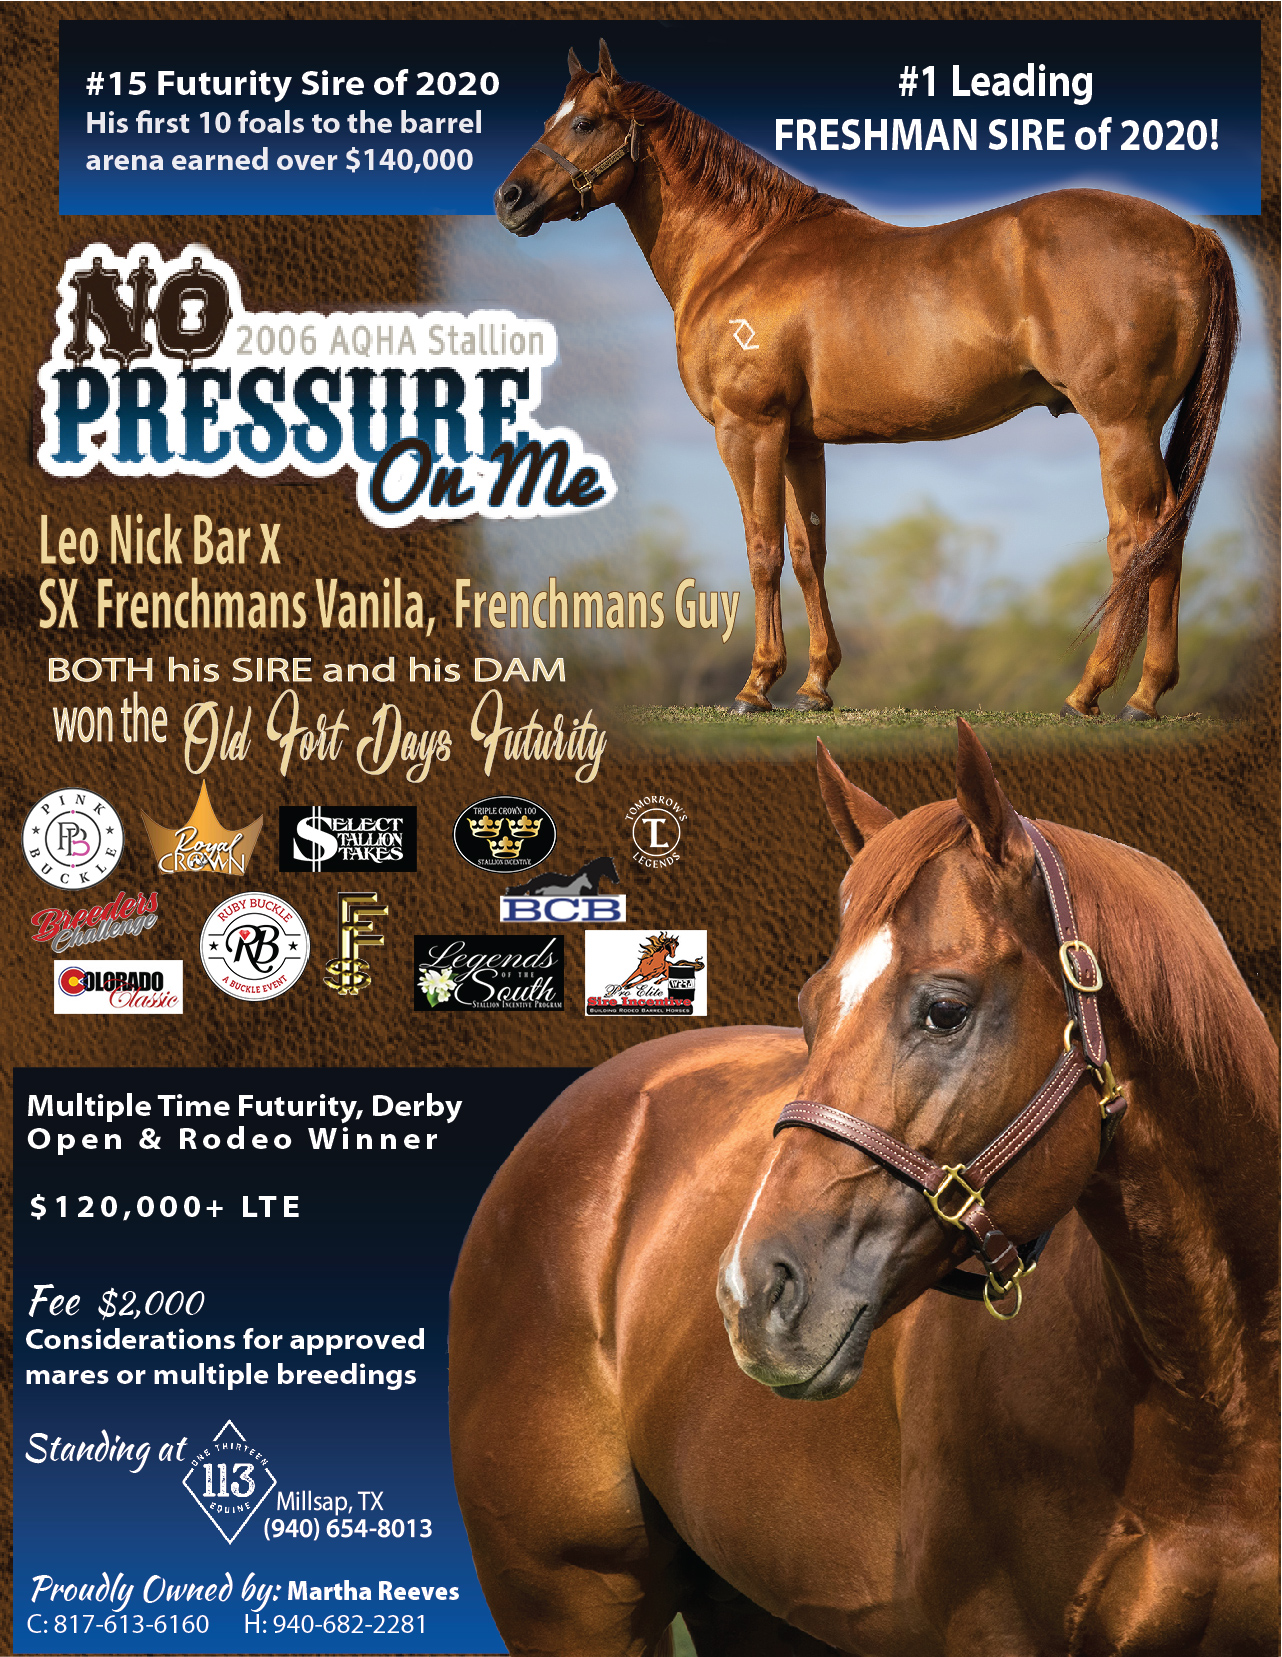 No Pressure On Me Legends of the South Stallion Incentive Program